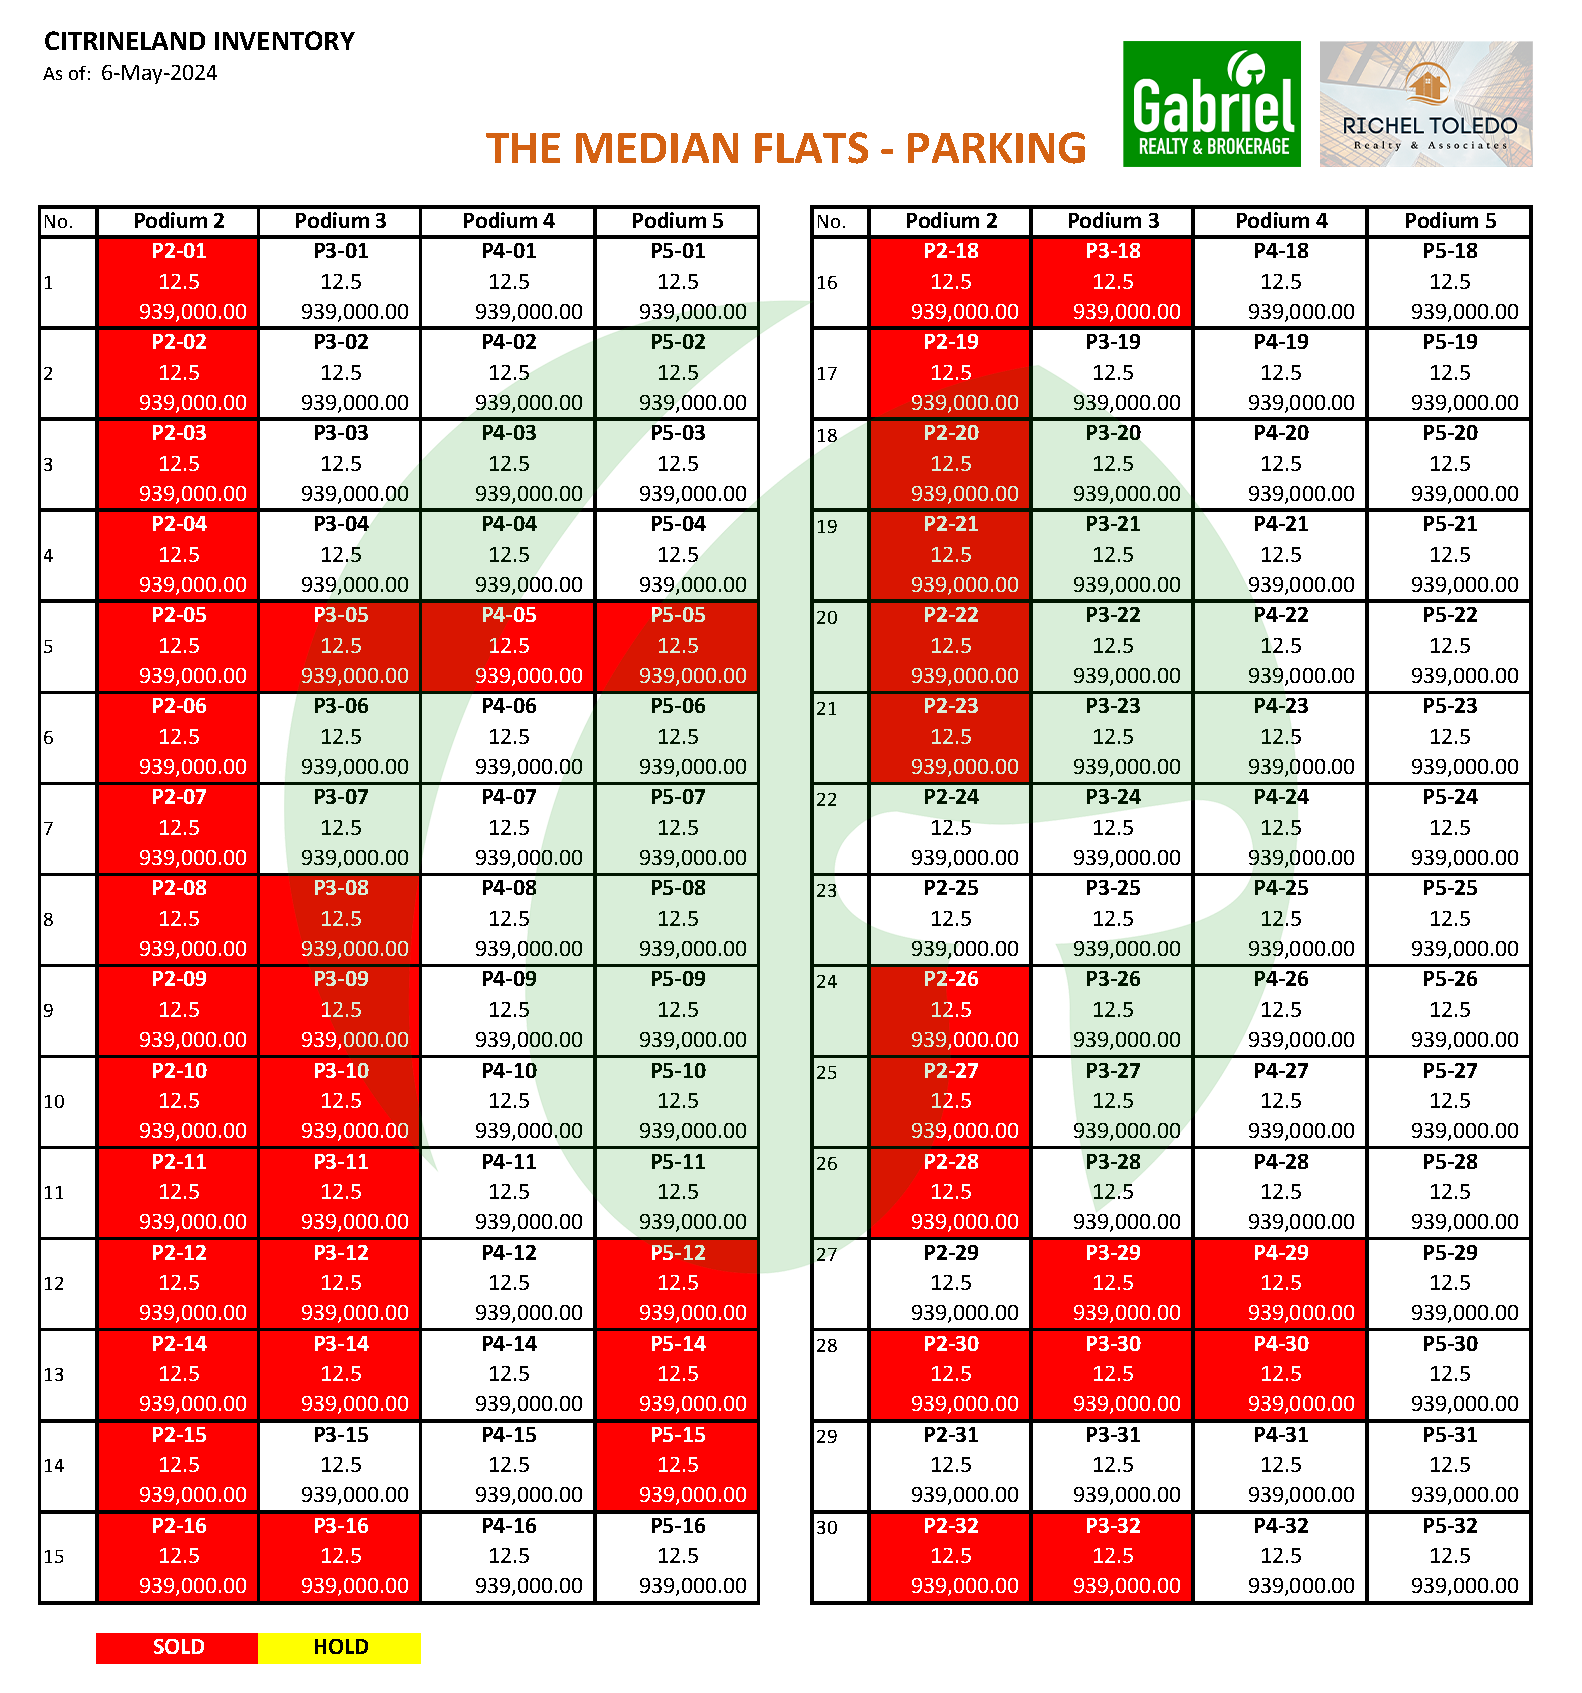 The Median Flats Parking Latest Inventory